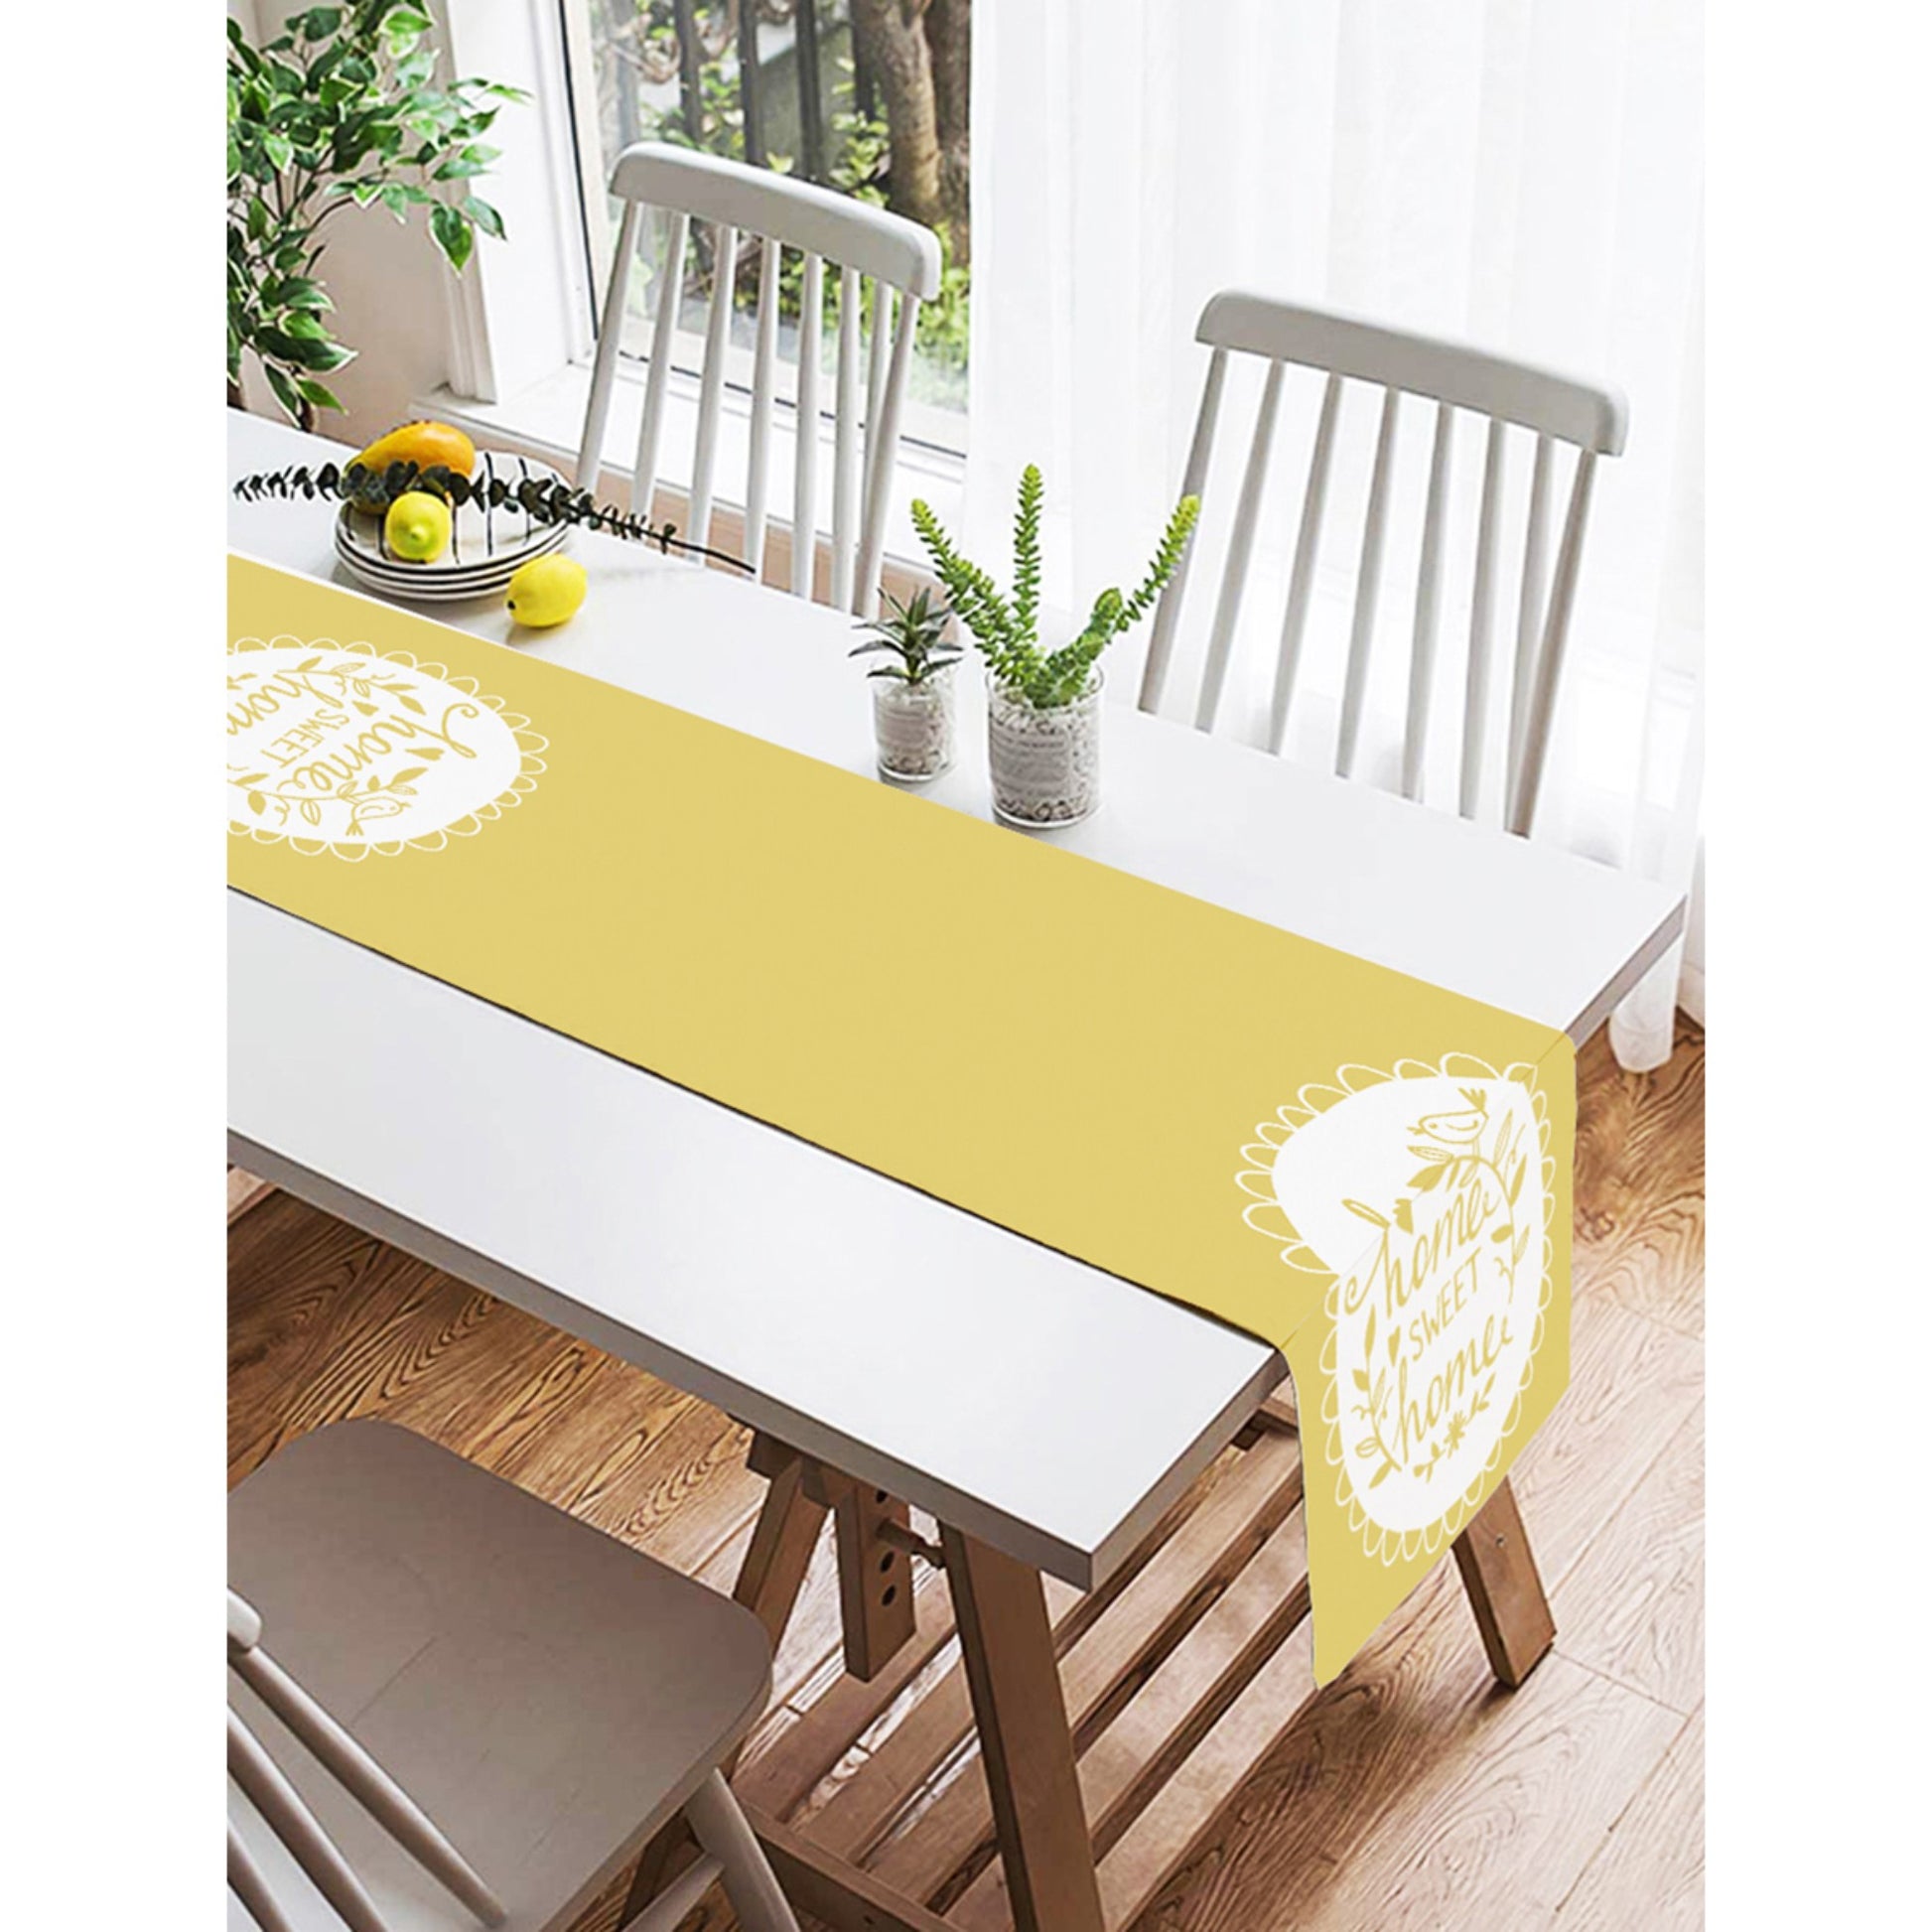 Contemporary table runner in yellow with "Home Sweet Home" embroidery for stylish dining.